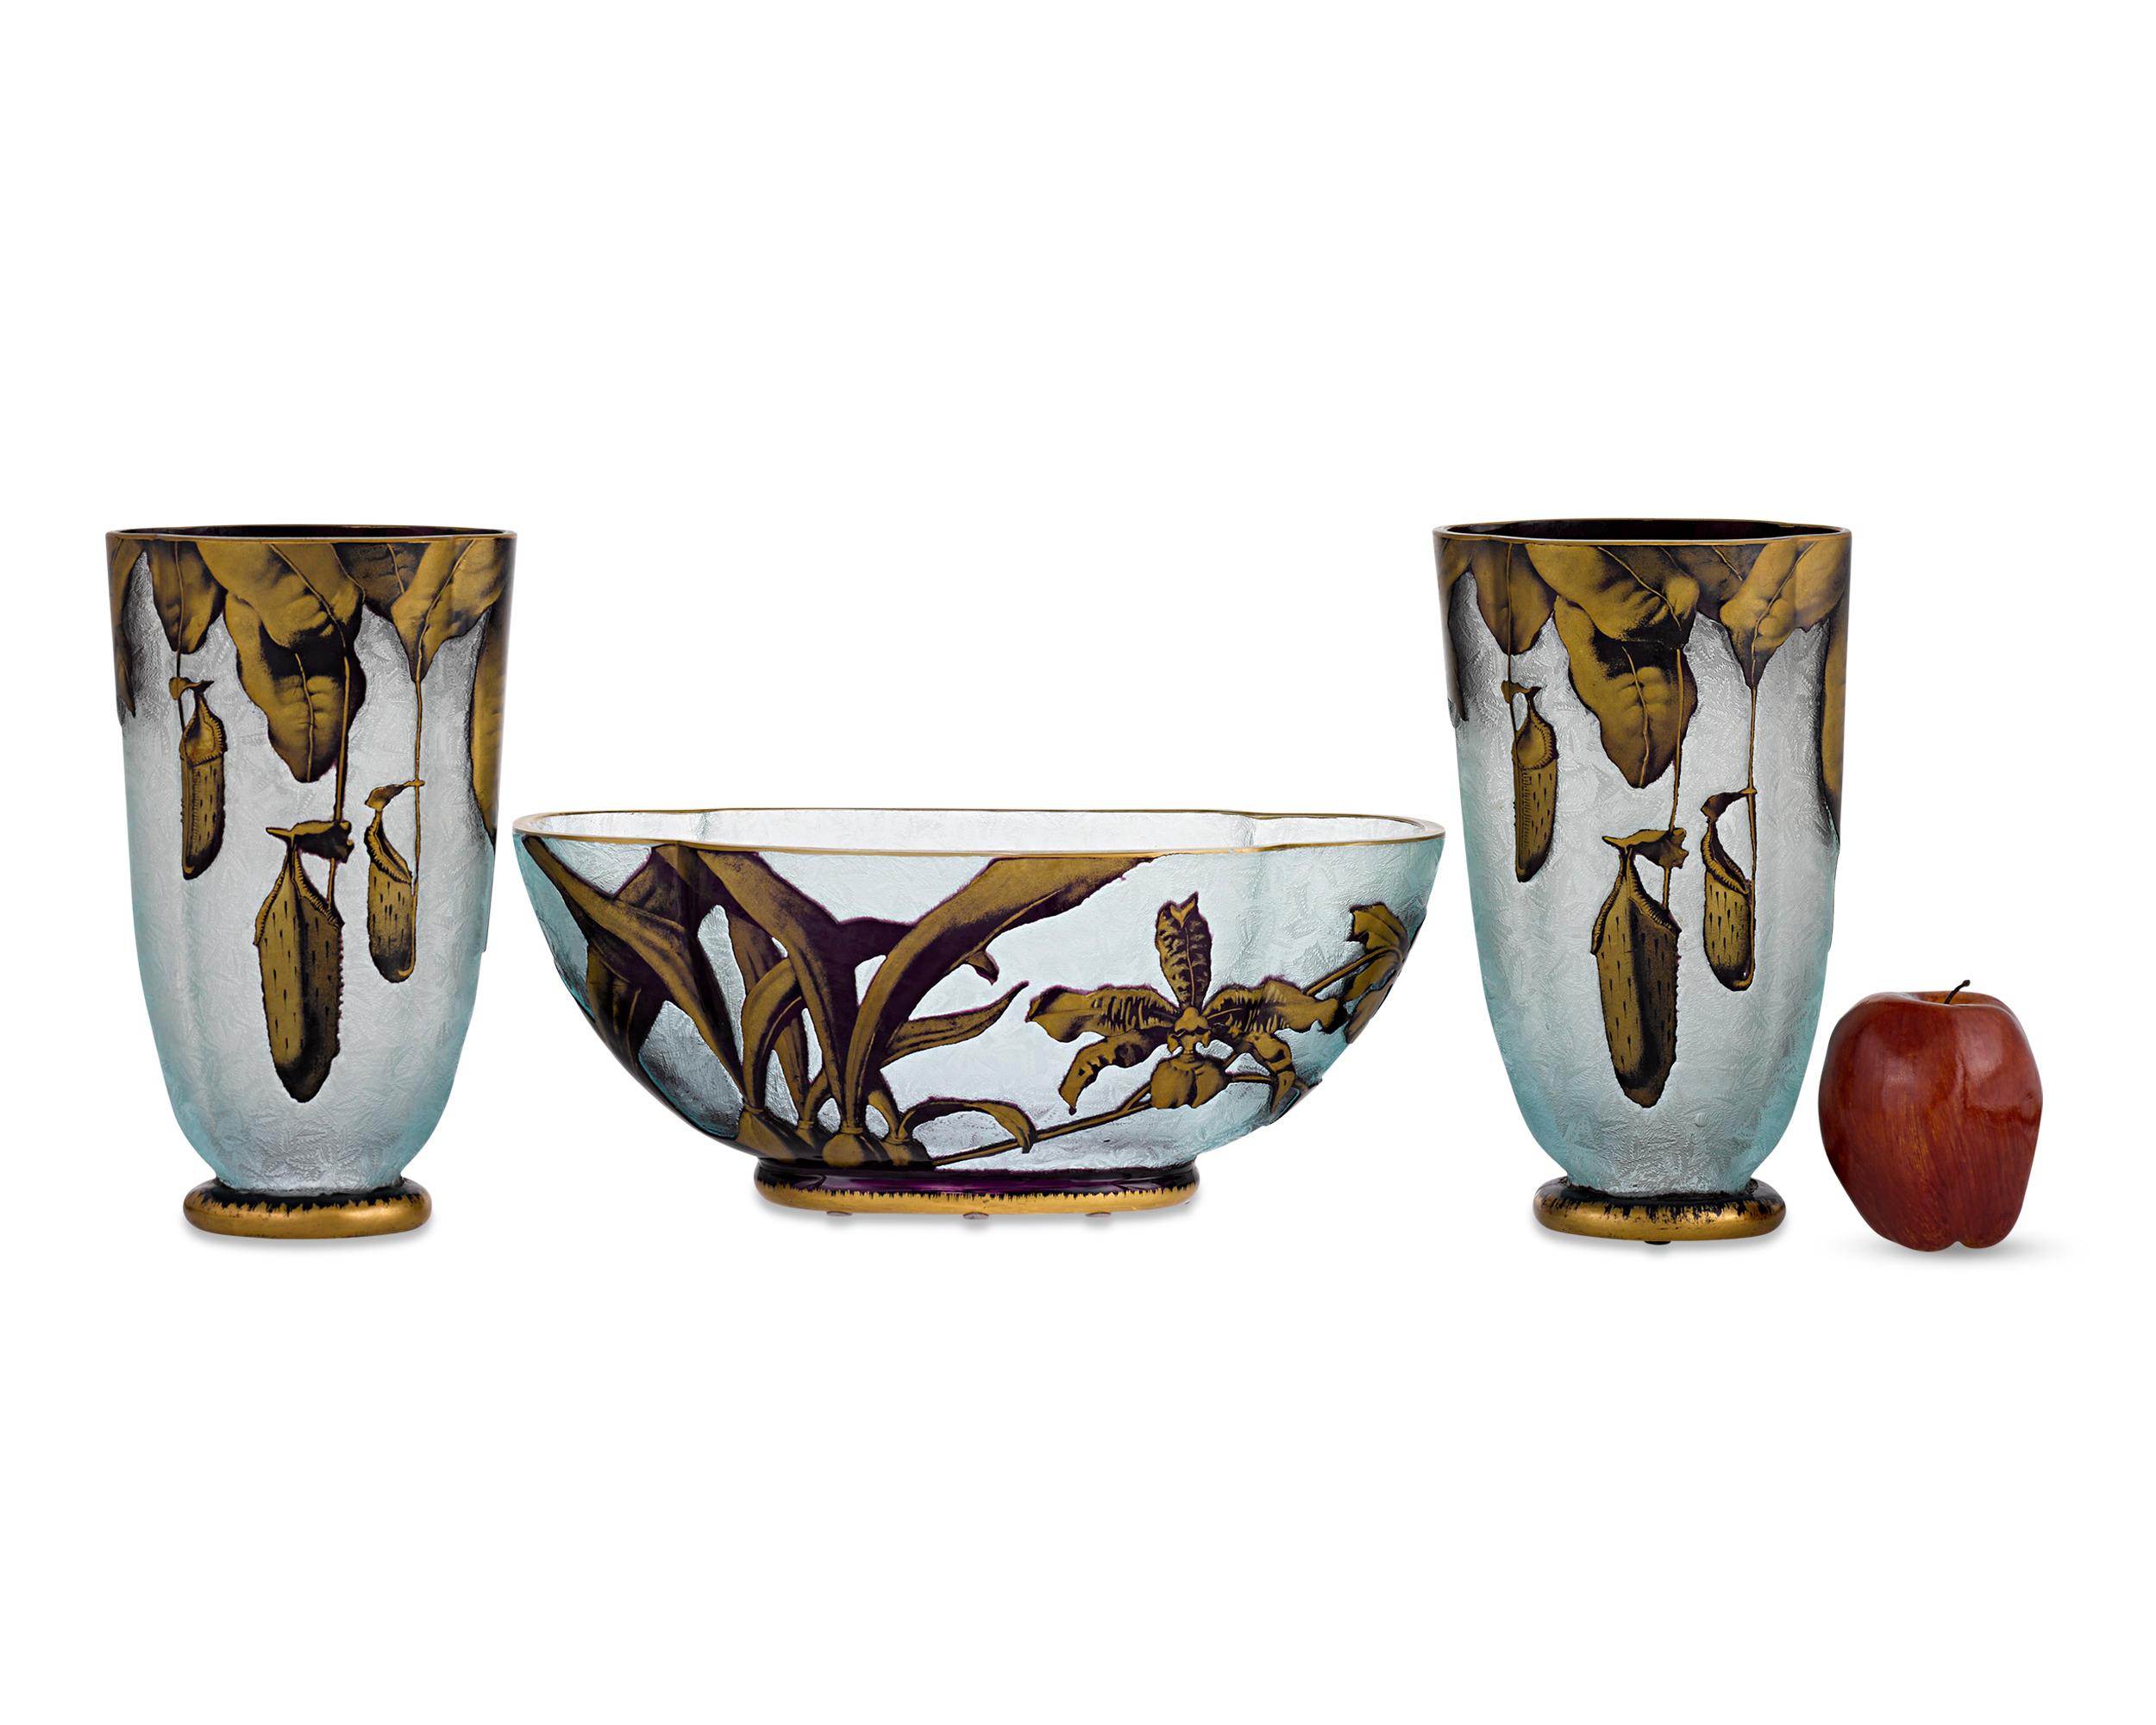 20th Century Nepenthes Garniture Set by Baccarat